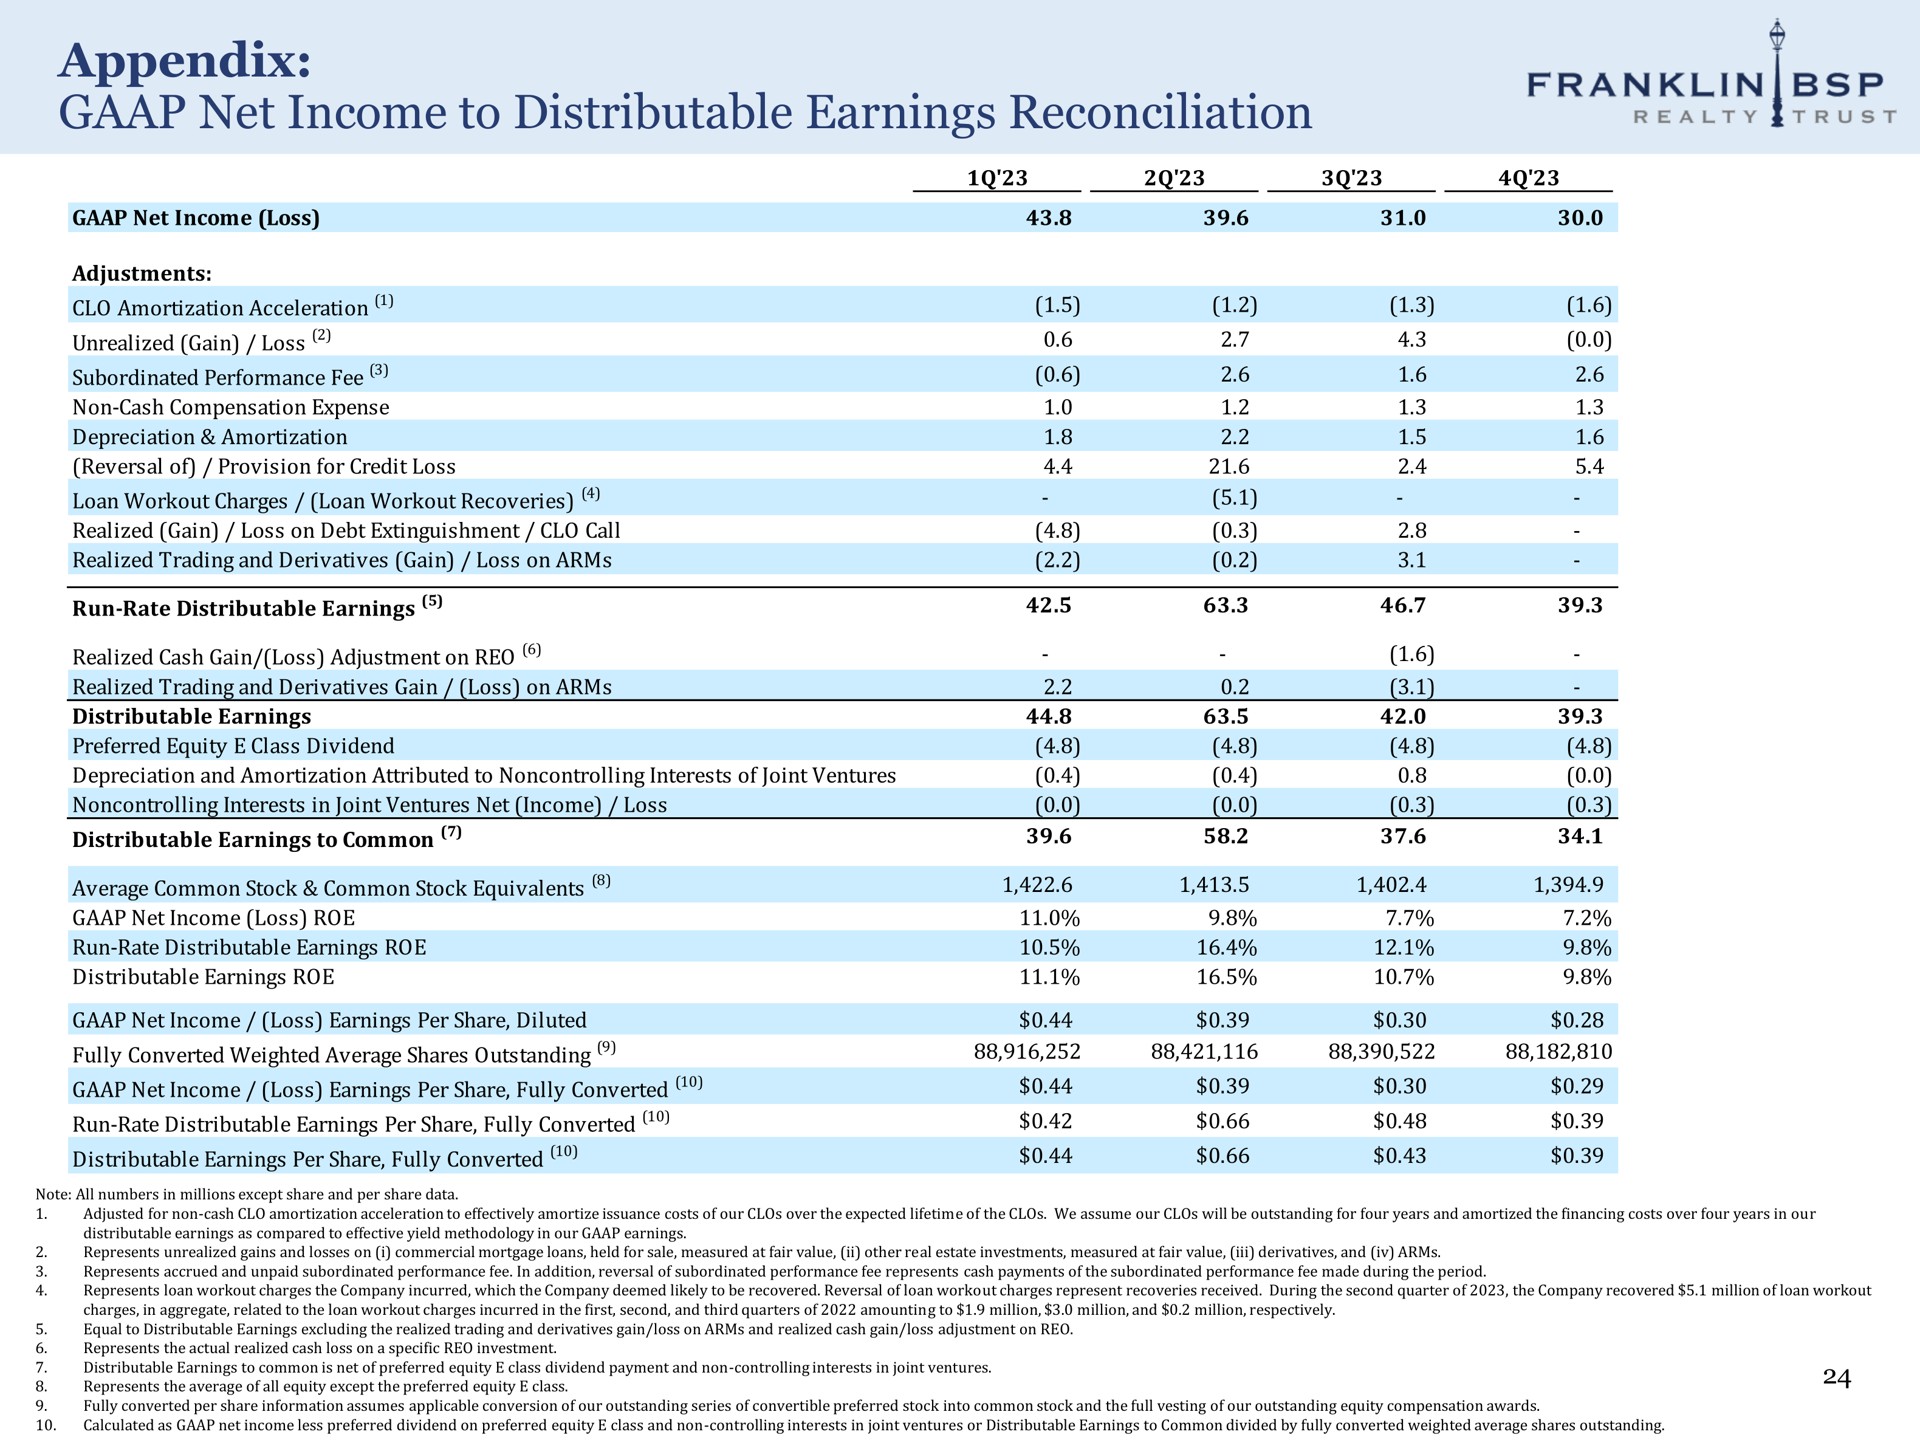 appendix net income to distributable earnings reconciliation yes franklin trust realty | Franklin BSP Realty Trust